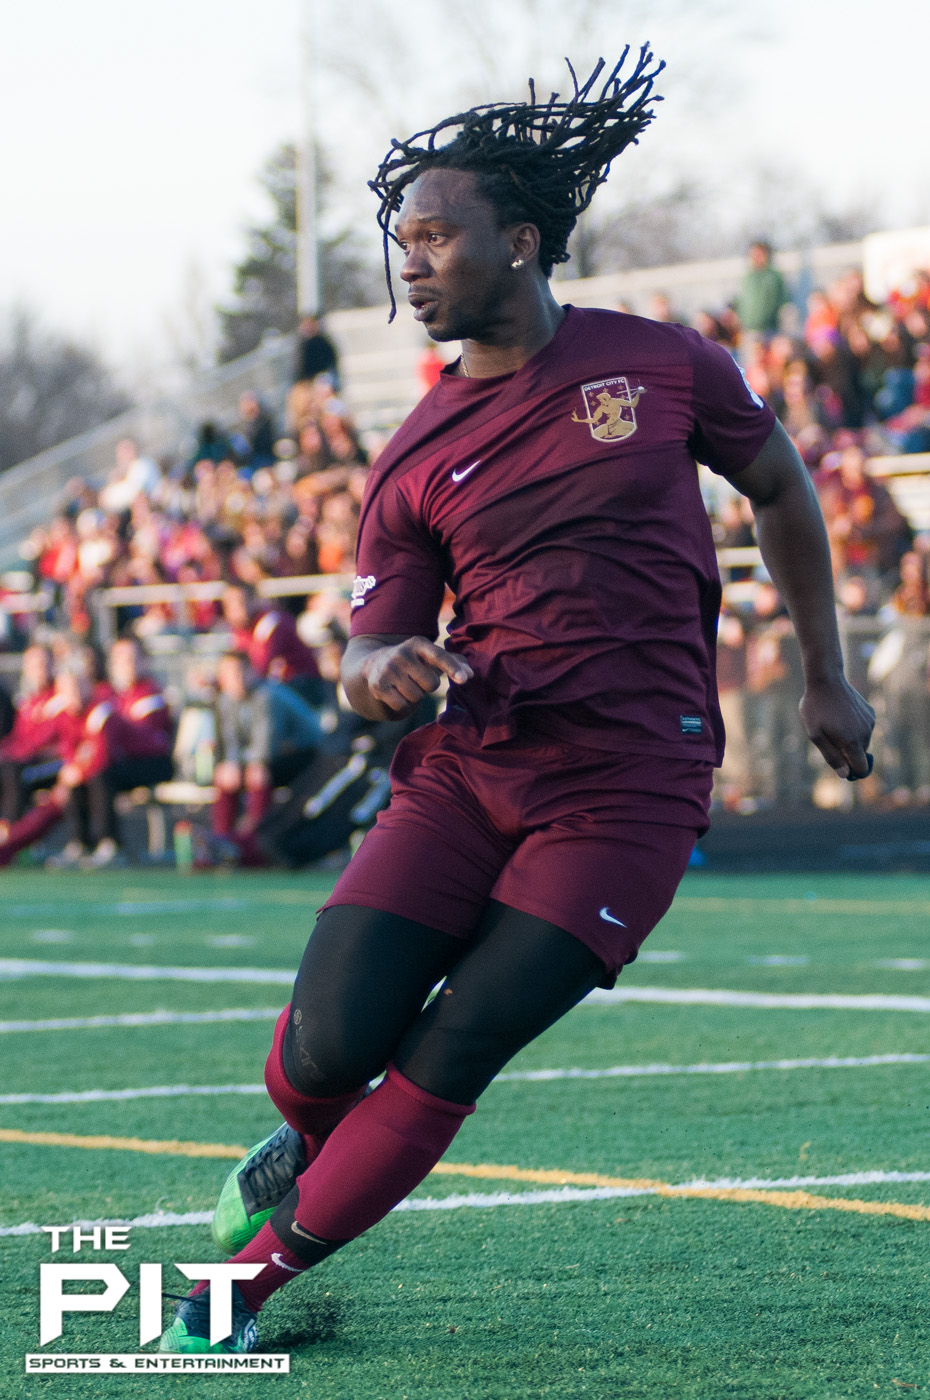 Detroit City FC Forward Stefan St. Louis (17) assists a shot attempt late in the game scrimmage match on April 19, 2014 at Hurley Field. Brian Quintos / The Pit: SE